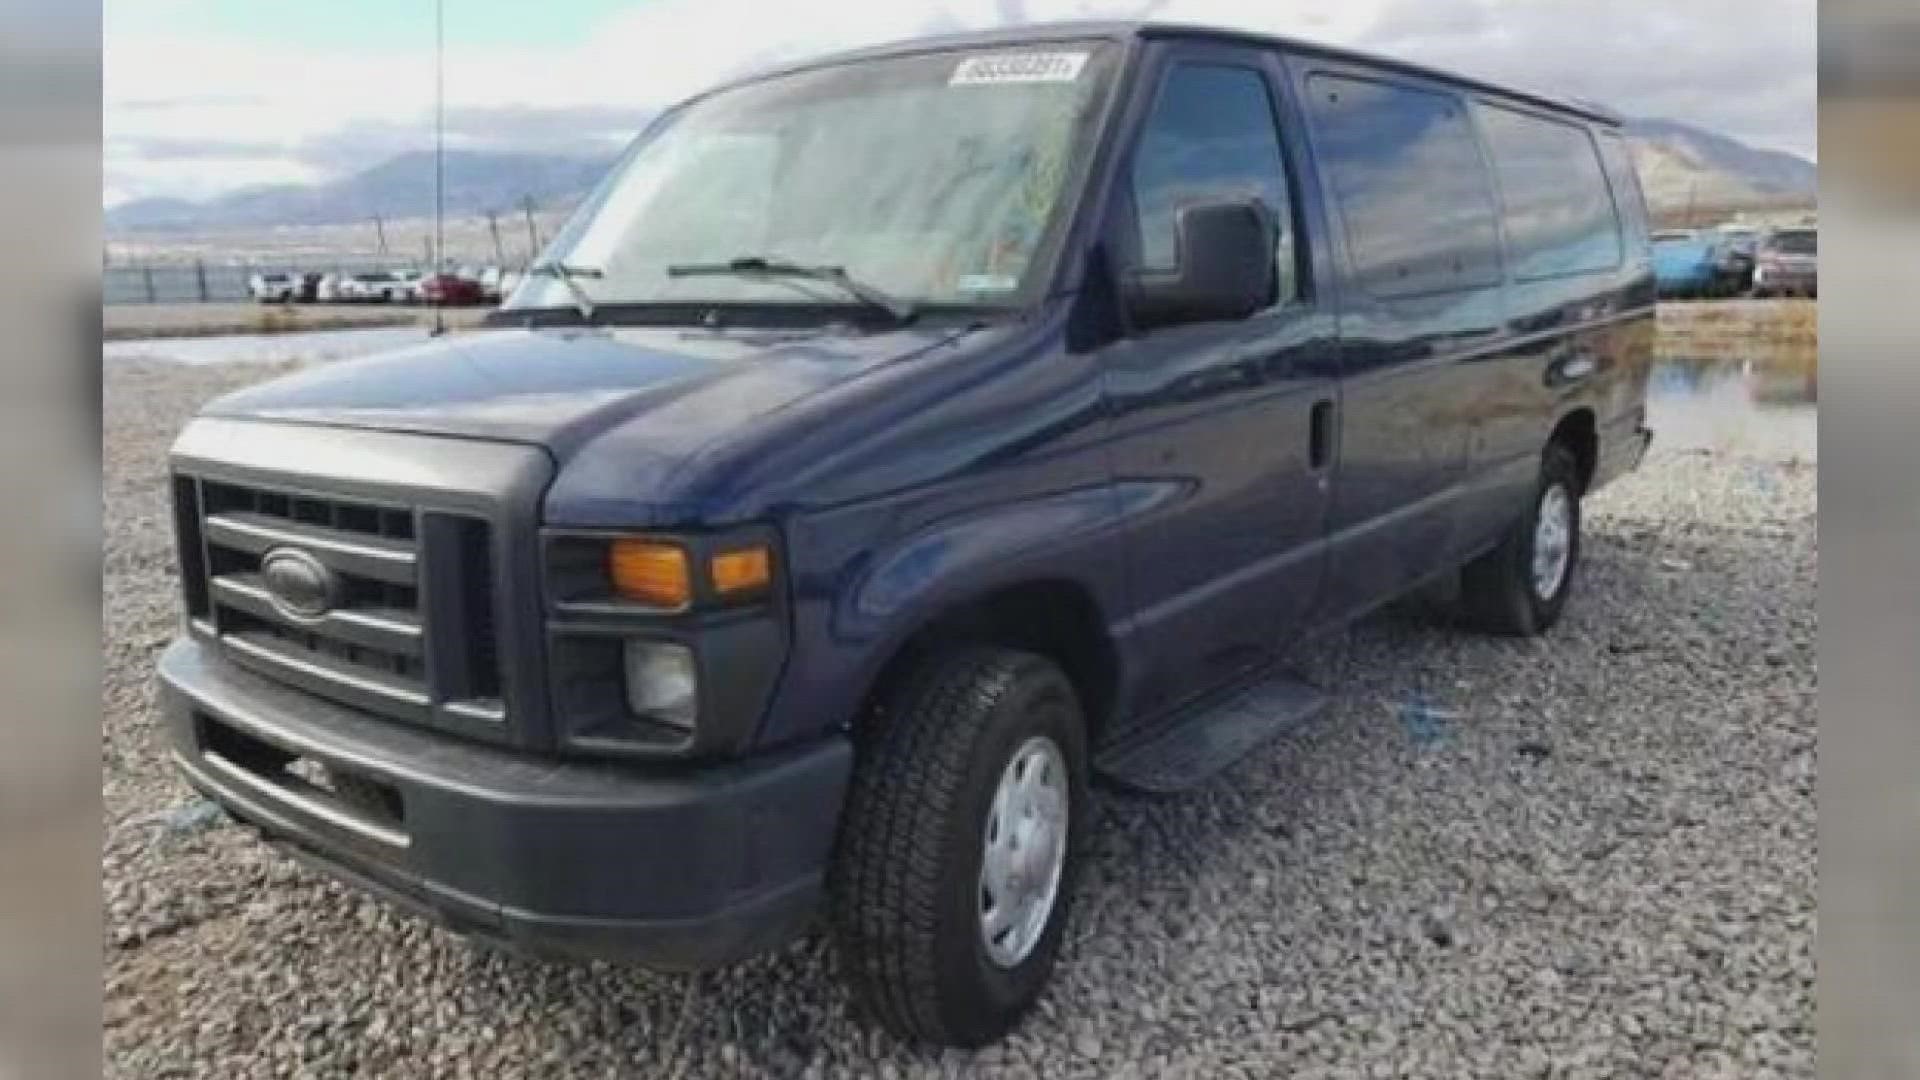 Police in three states are looking for a stolen church van used in several burglaries.